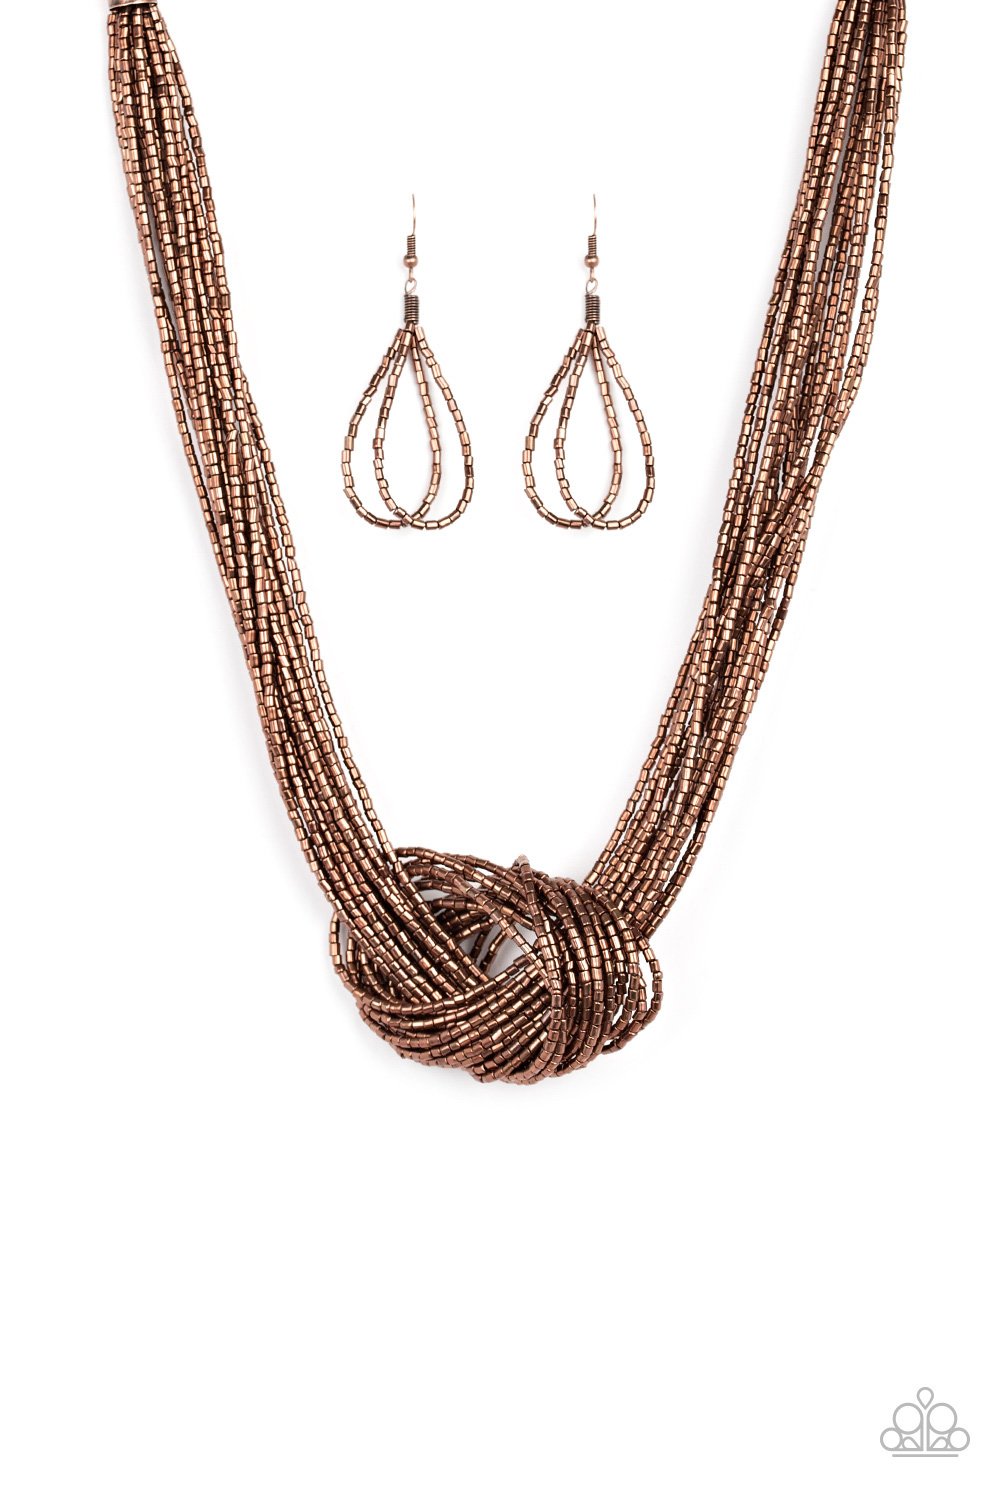 &lt;p&gt;Countless strands of copper seed beads delicately knot together below the collar to create an unforgettable statement piece. Features an adjustable clasp closure.&lt;/p&gt;
&lt;p&gt;&lt;i&gt;Sold as one individual necklace. Includes one pair of matching earrings.&lt;/i&gt;&lt;/p&gt;